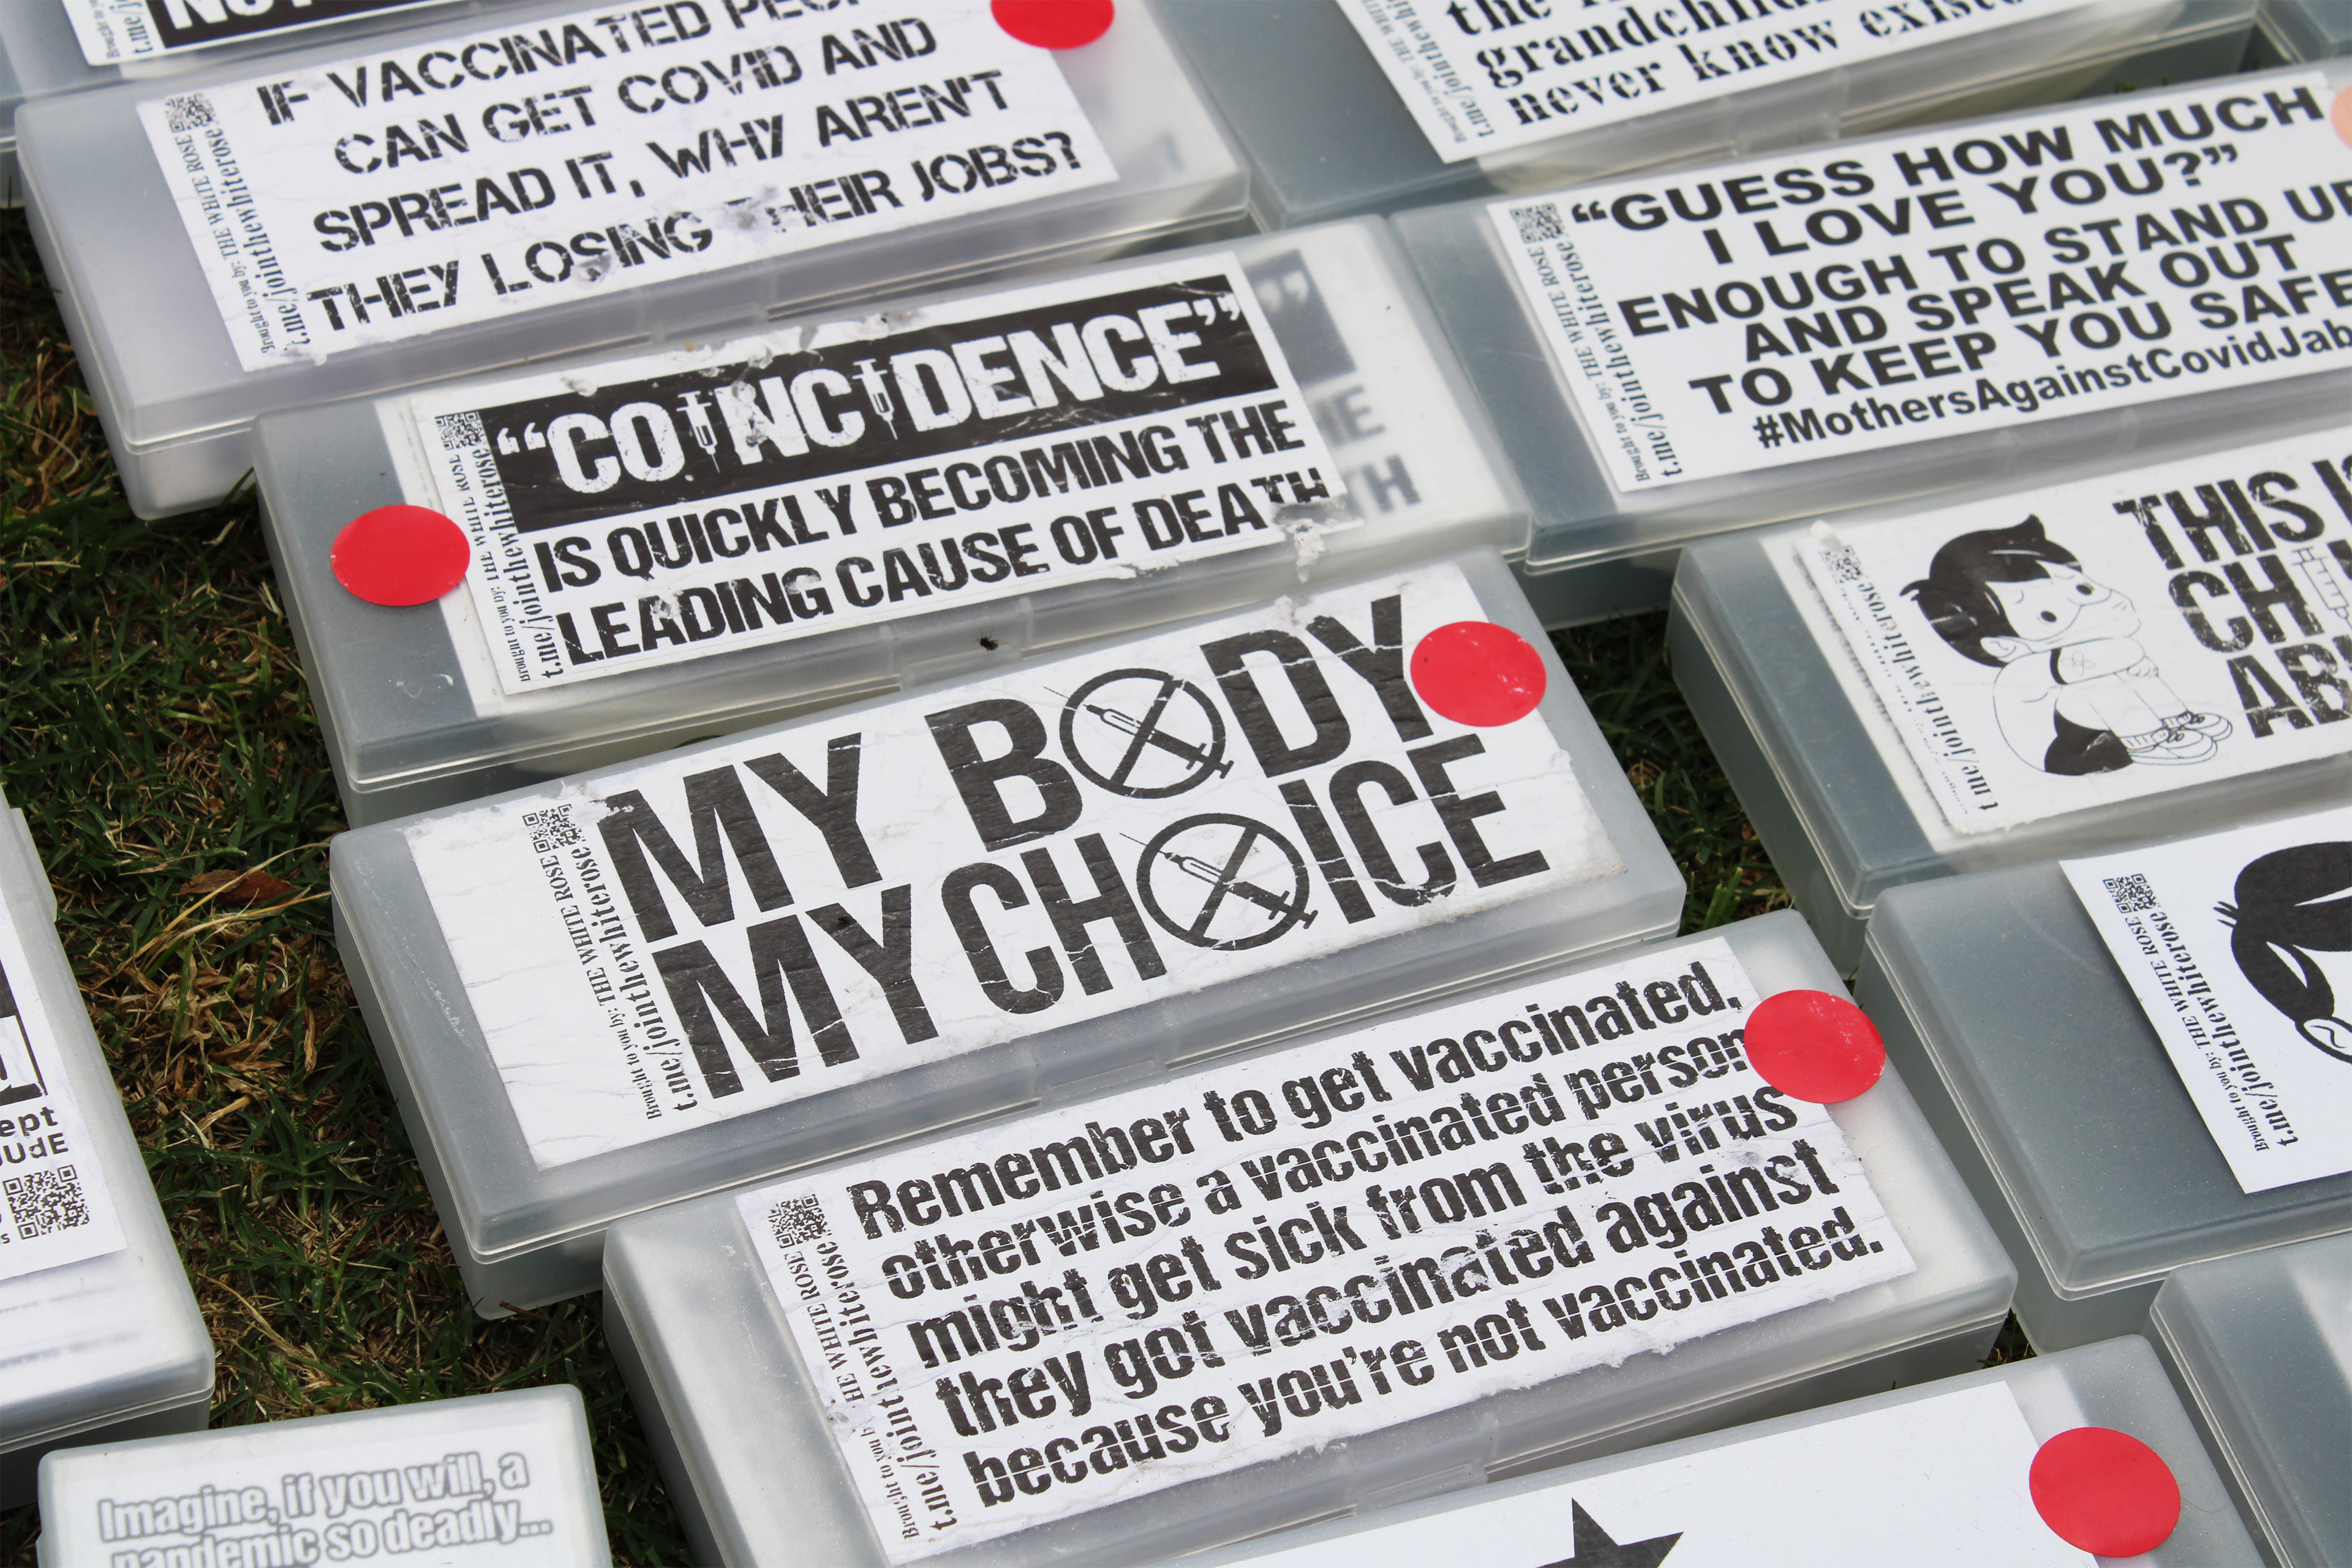 A closeup photos show boxes of stickers at an anti-vaccine protest. One of the boxes shows stickers that read, "My body, my choice."